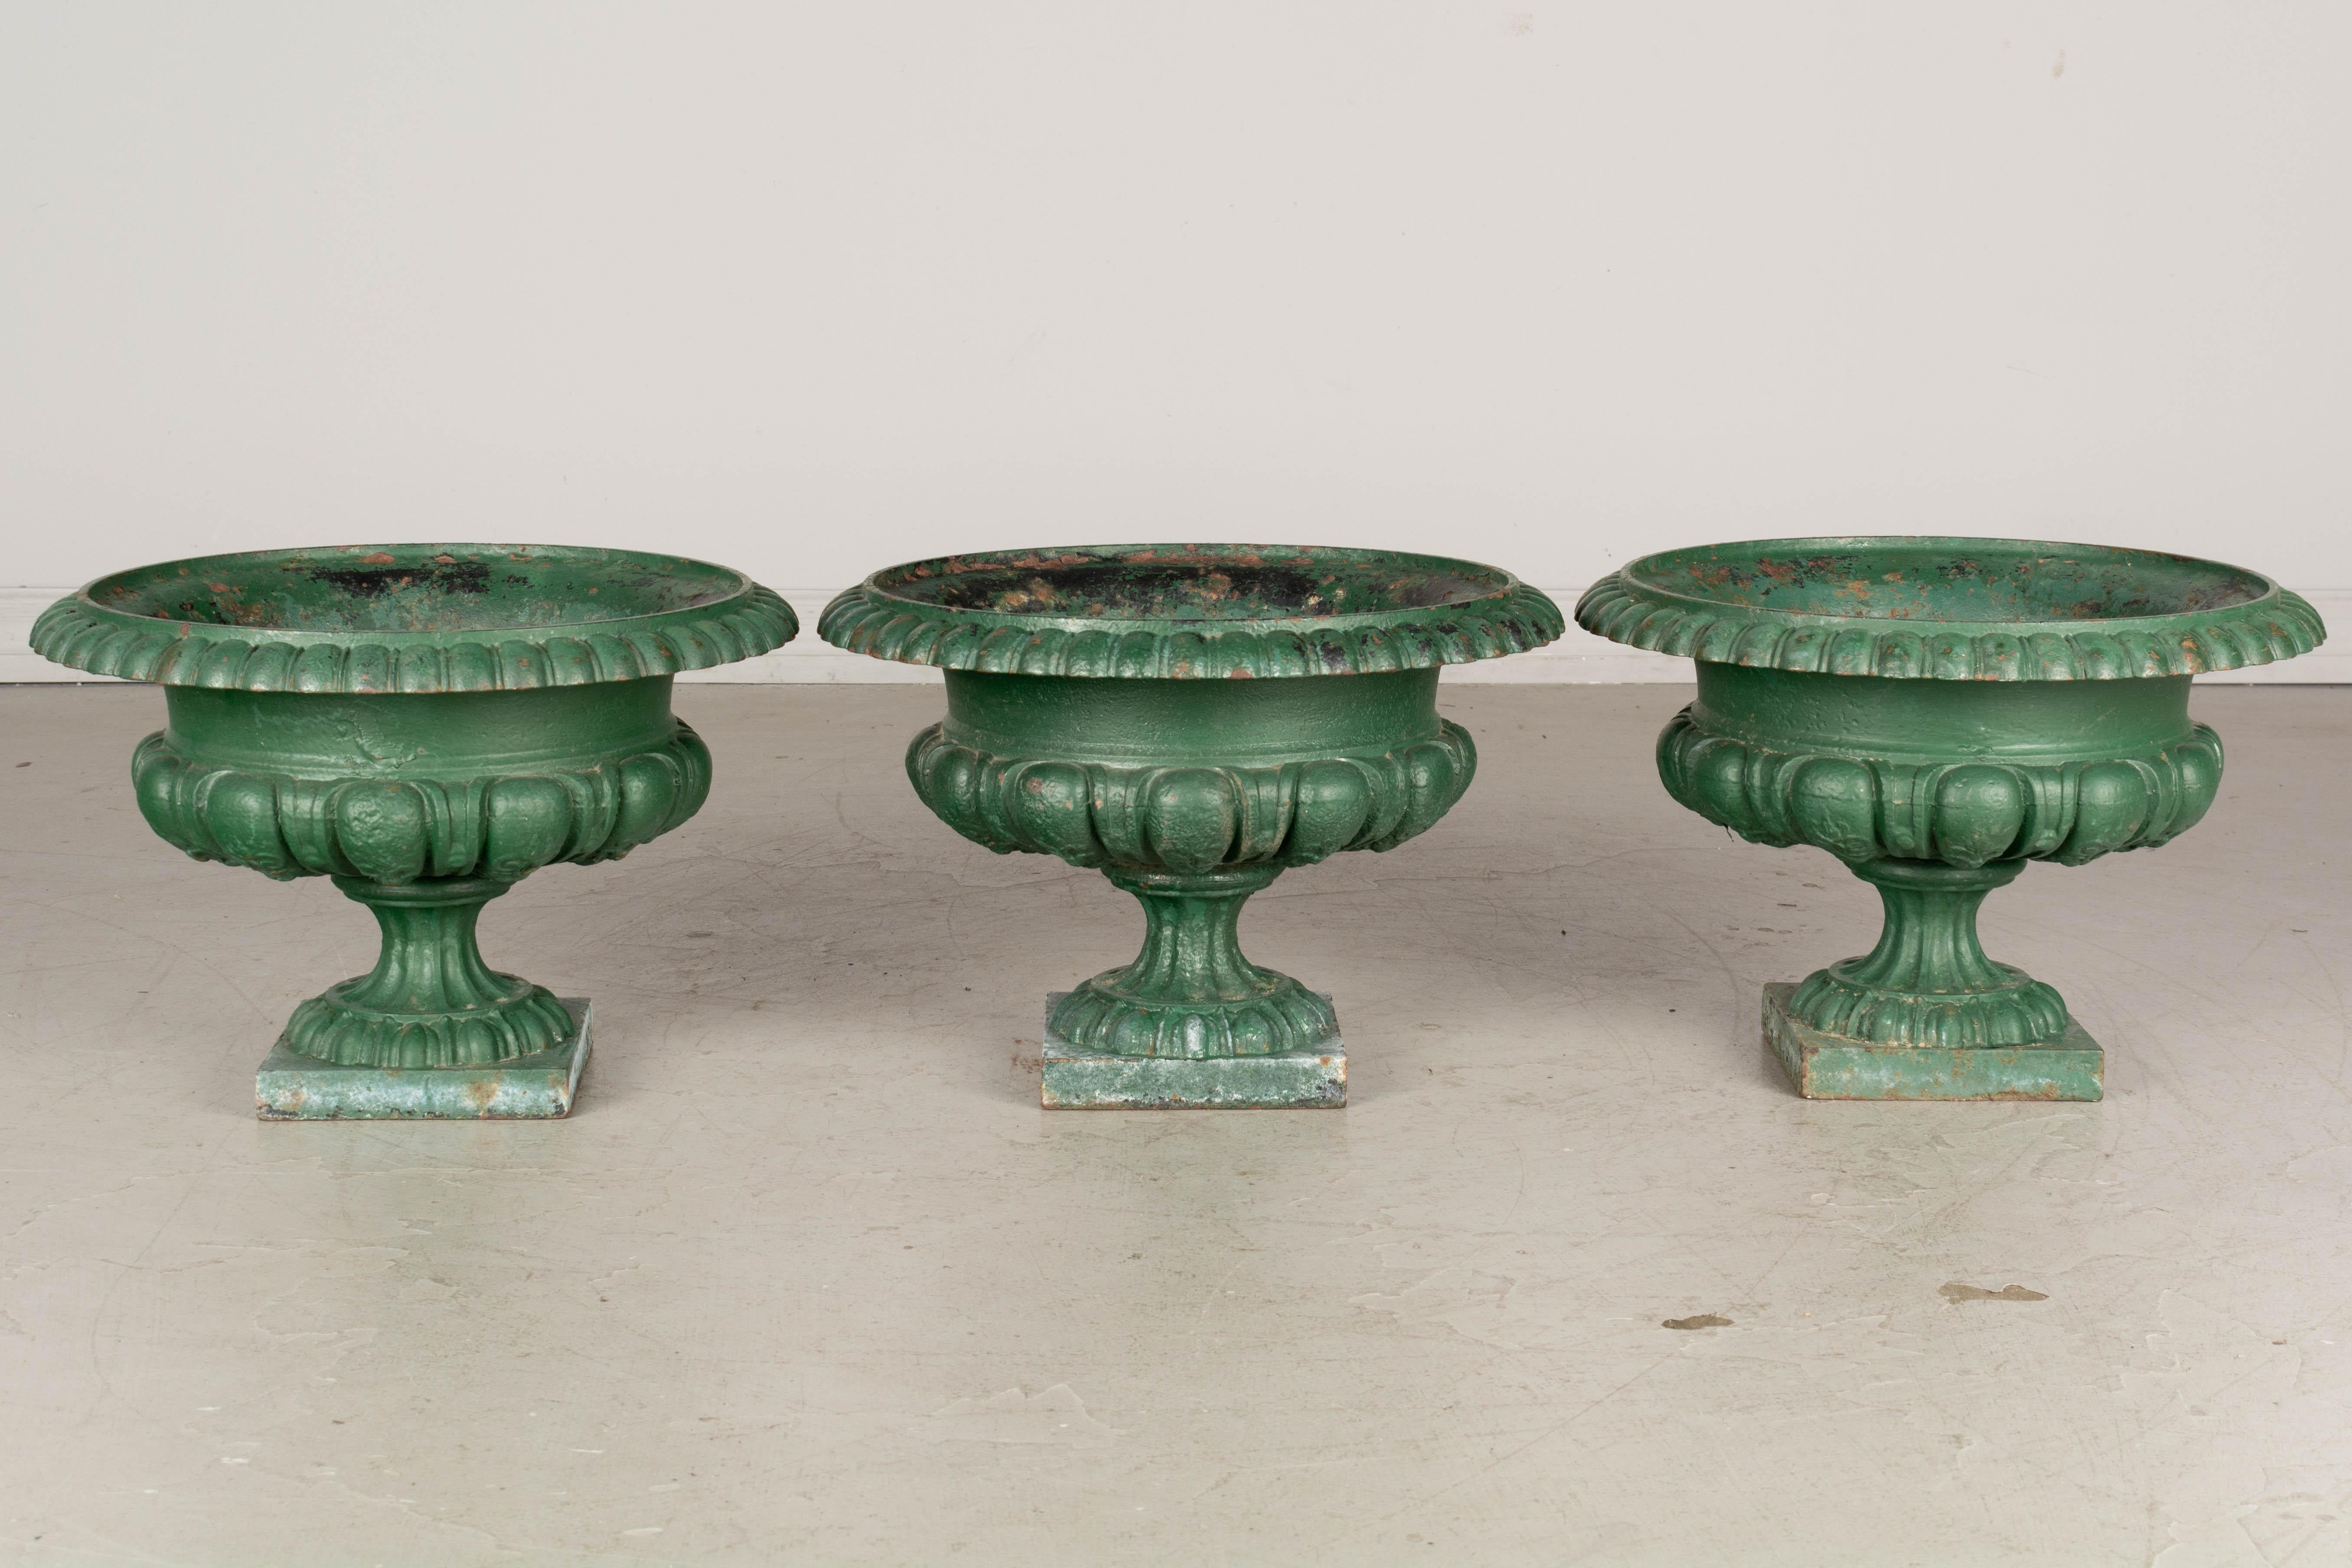 Beaux Arts 19th Century French Cast Iron Garden Urns Set of 3